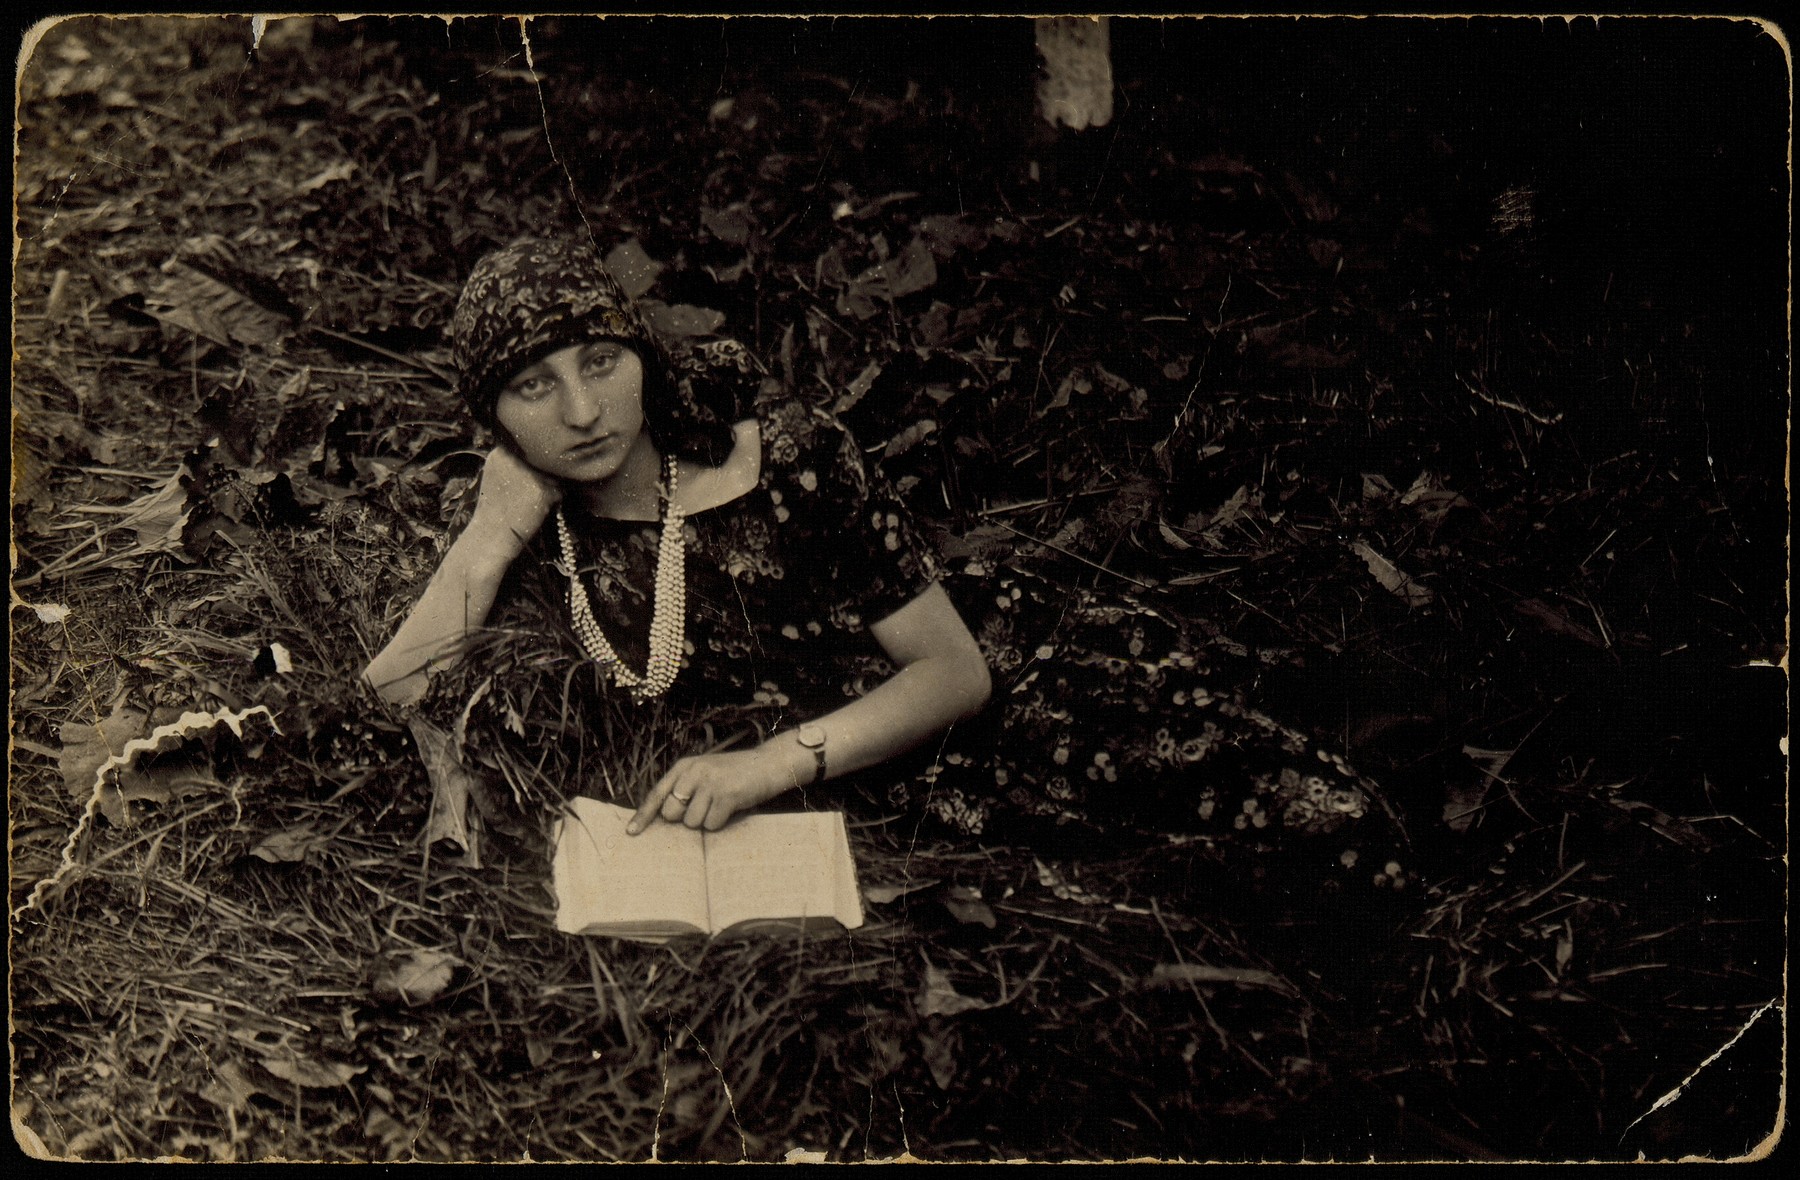 Zipporah Katz (Sonenson), one of the shtetl Hebrew librarians, reads a book while lying in a field.

Zipporah was murdered by the Polish Home Army on October 20, 1944. The inscription on the back of the photo reads, "Leahle remember your friend Feigele (Zipporah)".